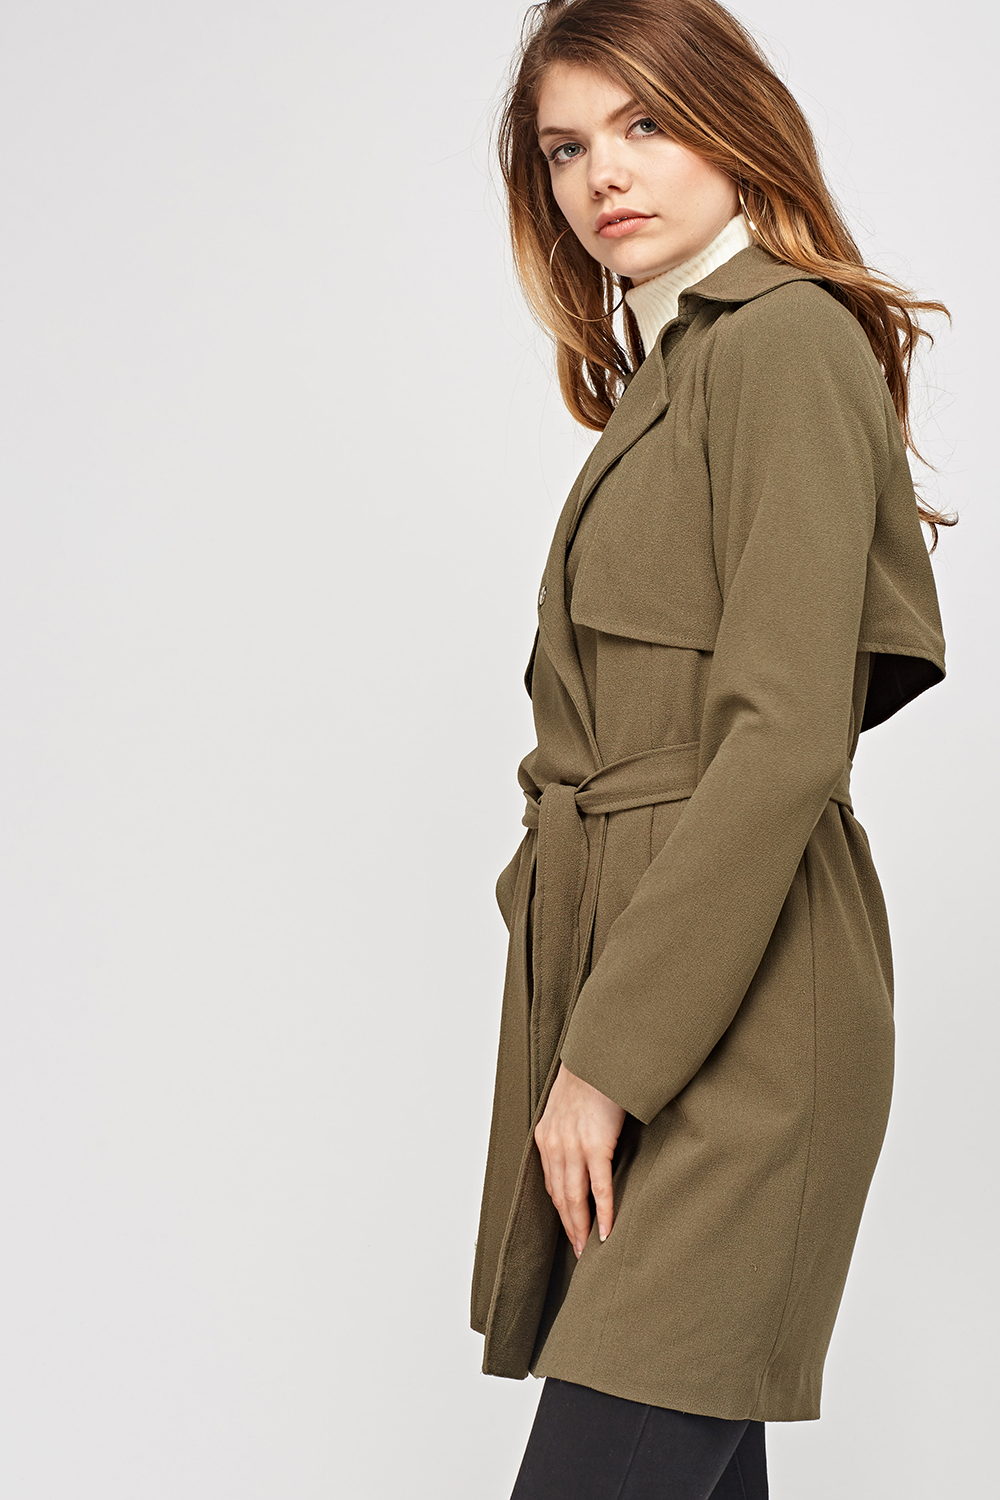 Textured Trench Coat - Just $7